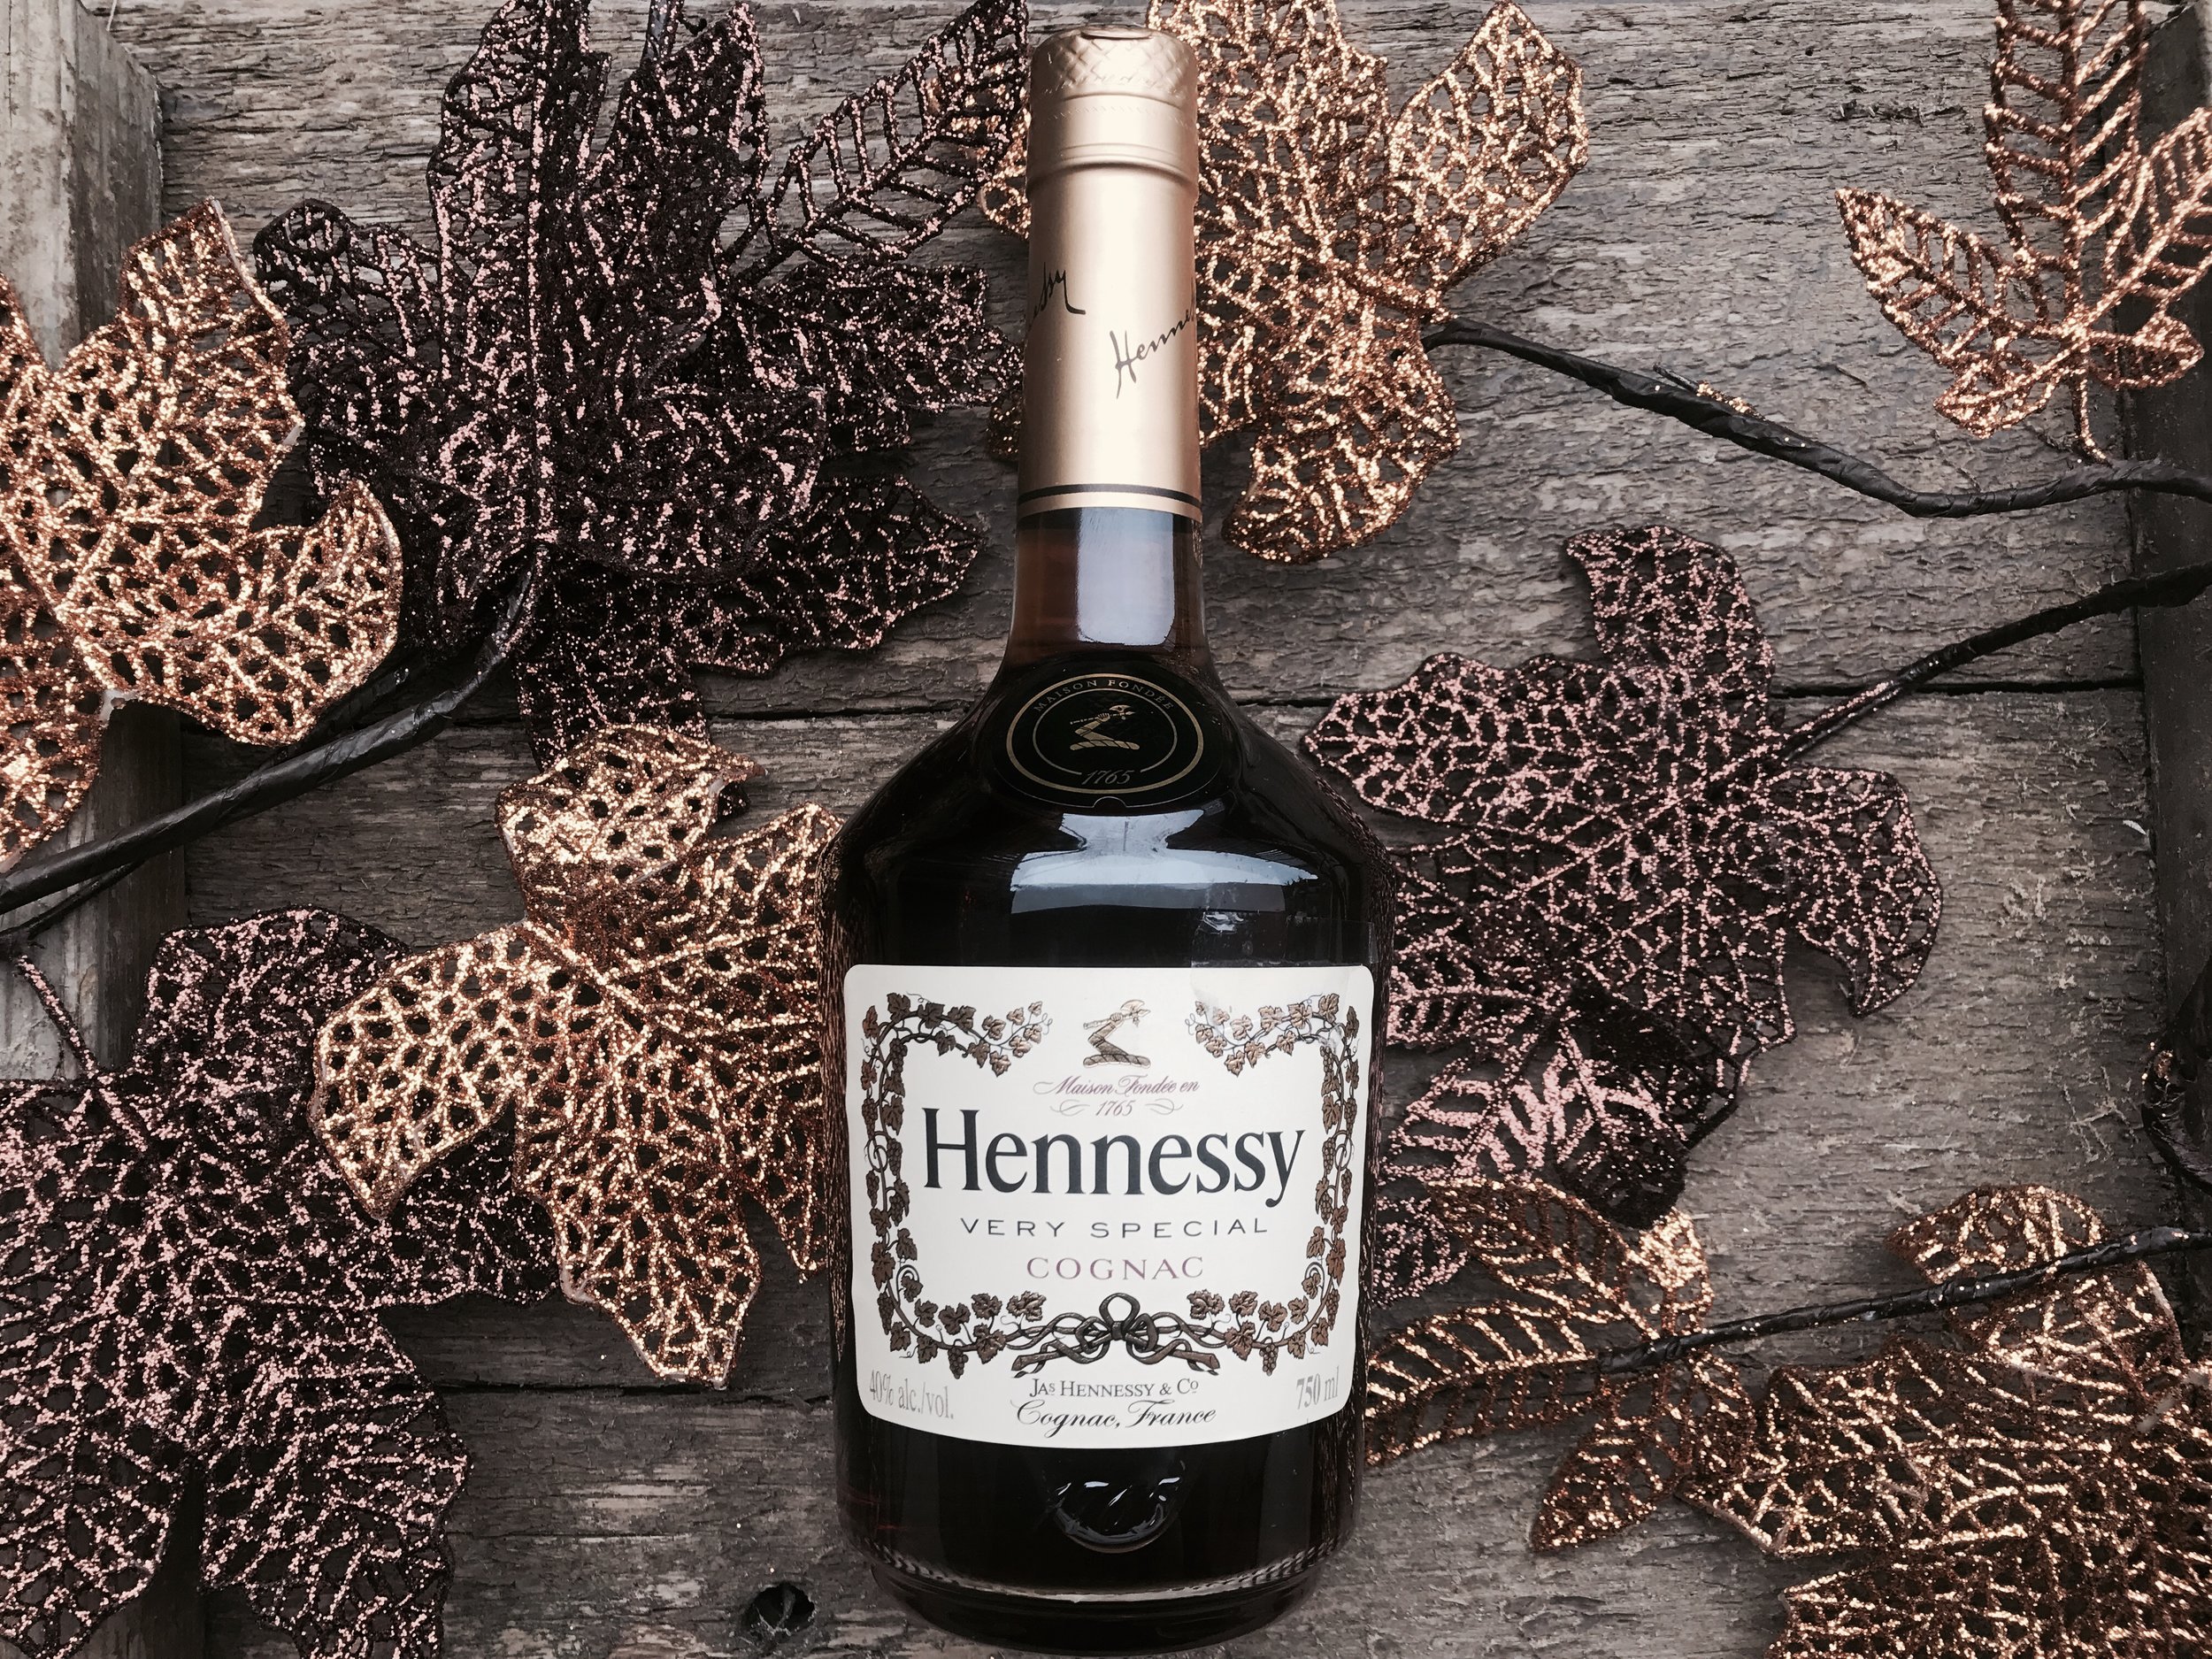 Shop all HENNESSY products here.